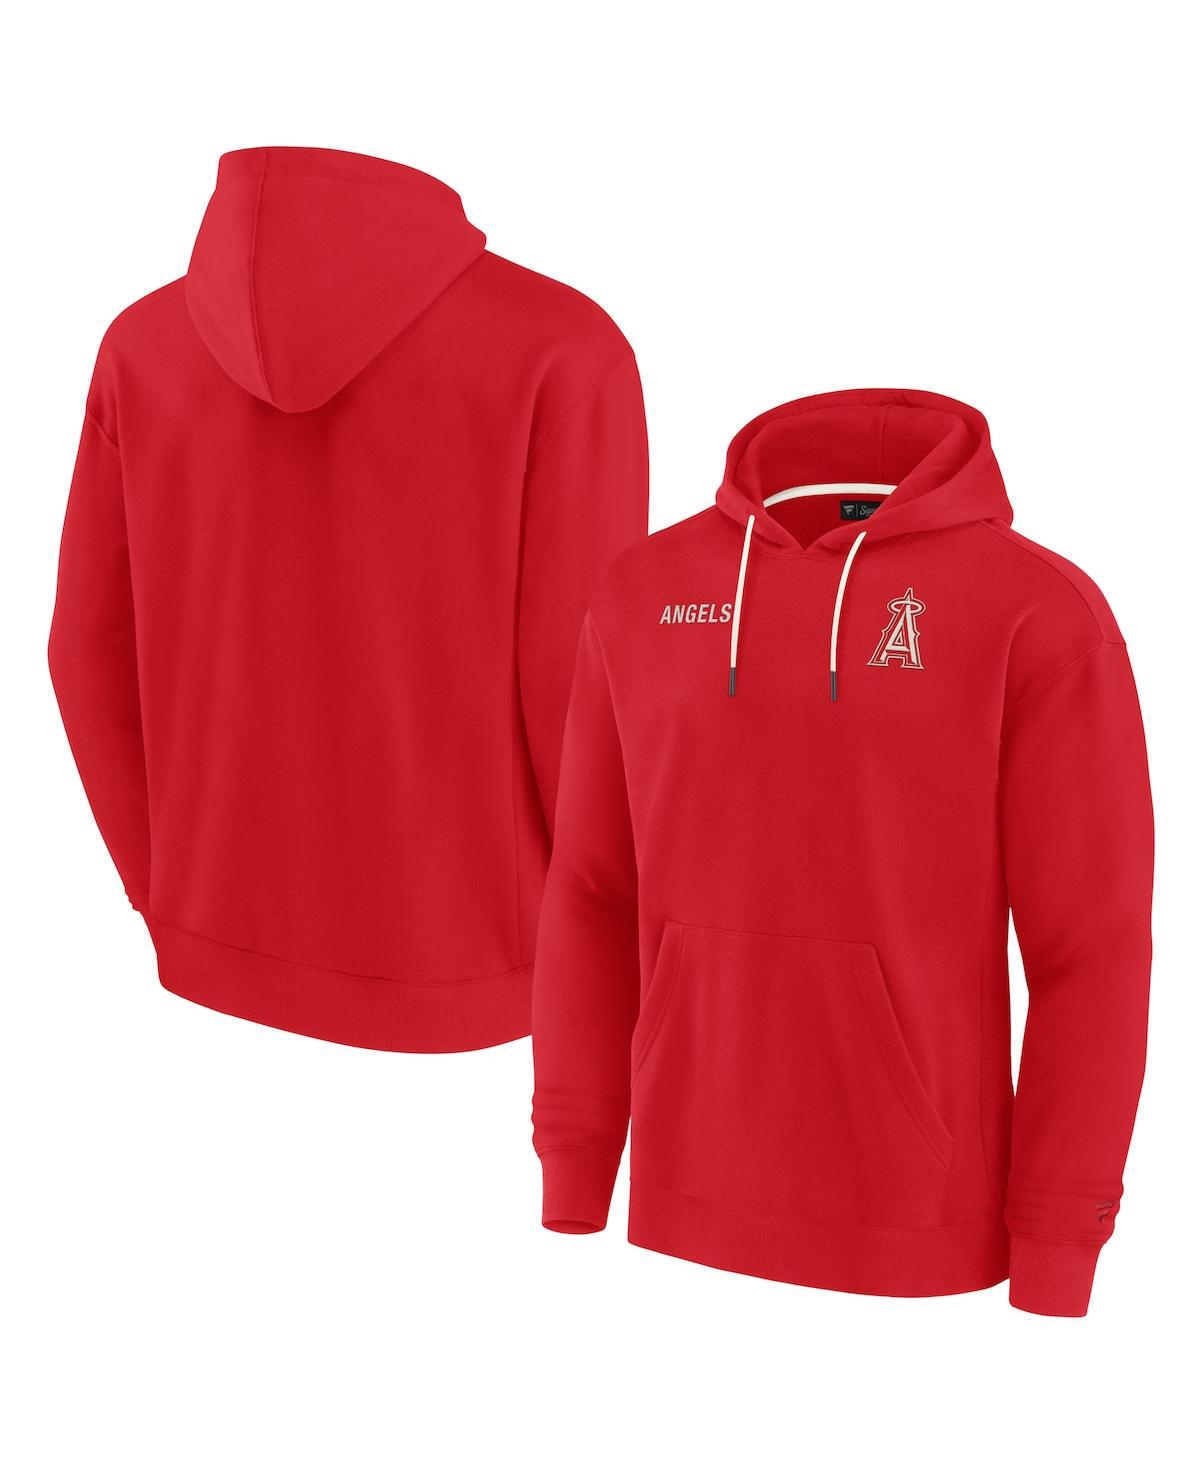 Men's and Women's Fanatics Signature Red Los Angeles Angels Super Soft Fleece Pullover Hoodie - Red